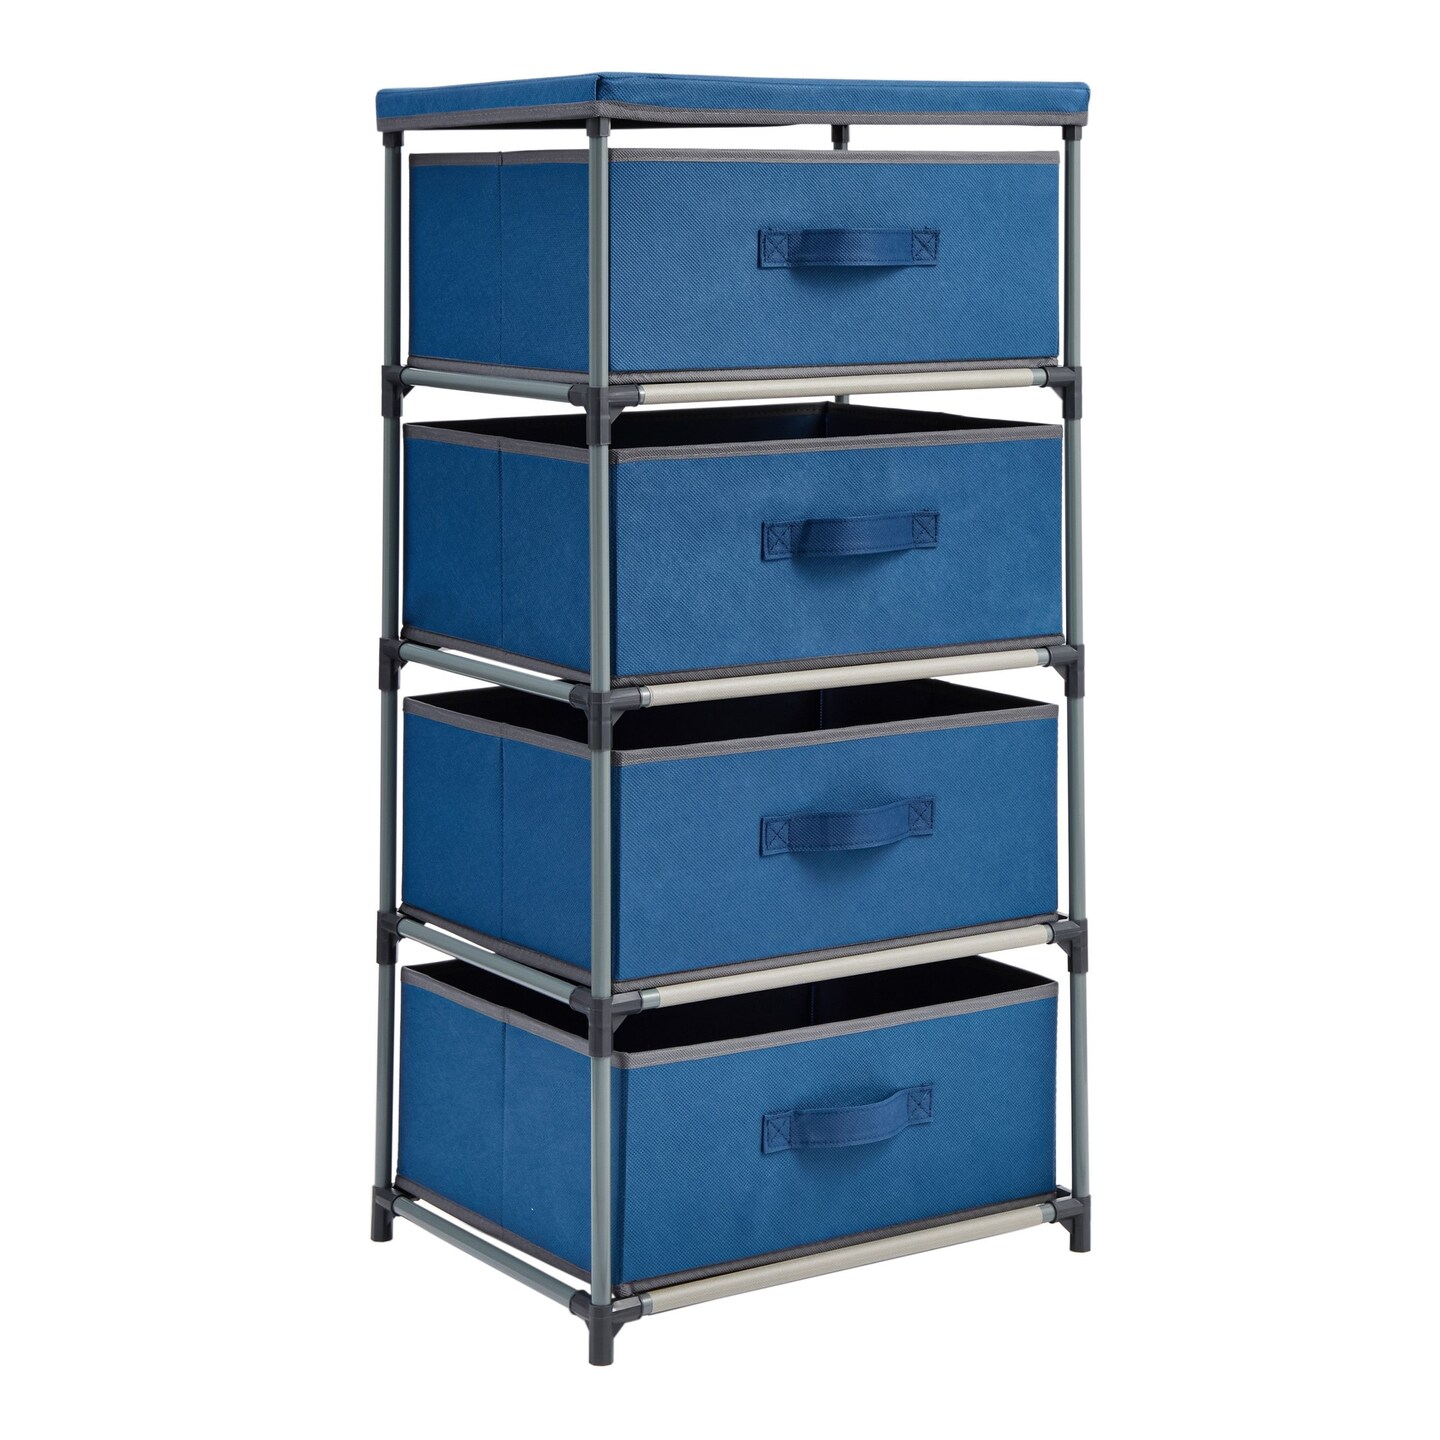 4-Tier Tall Closet Dresser with Drawers - Clothes Organizer and Small Fabric Storage for Bedroom (Navy Blue)